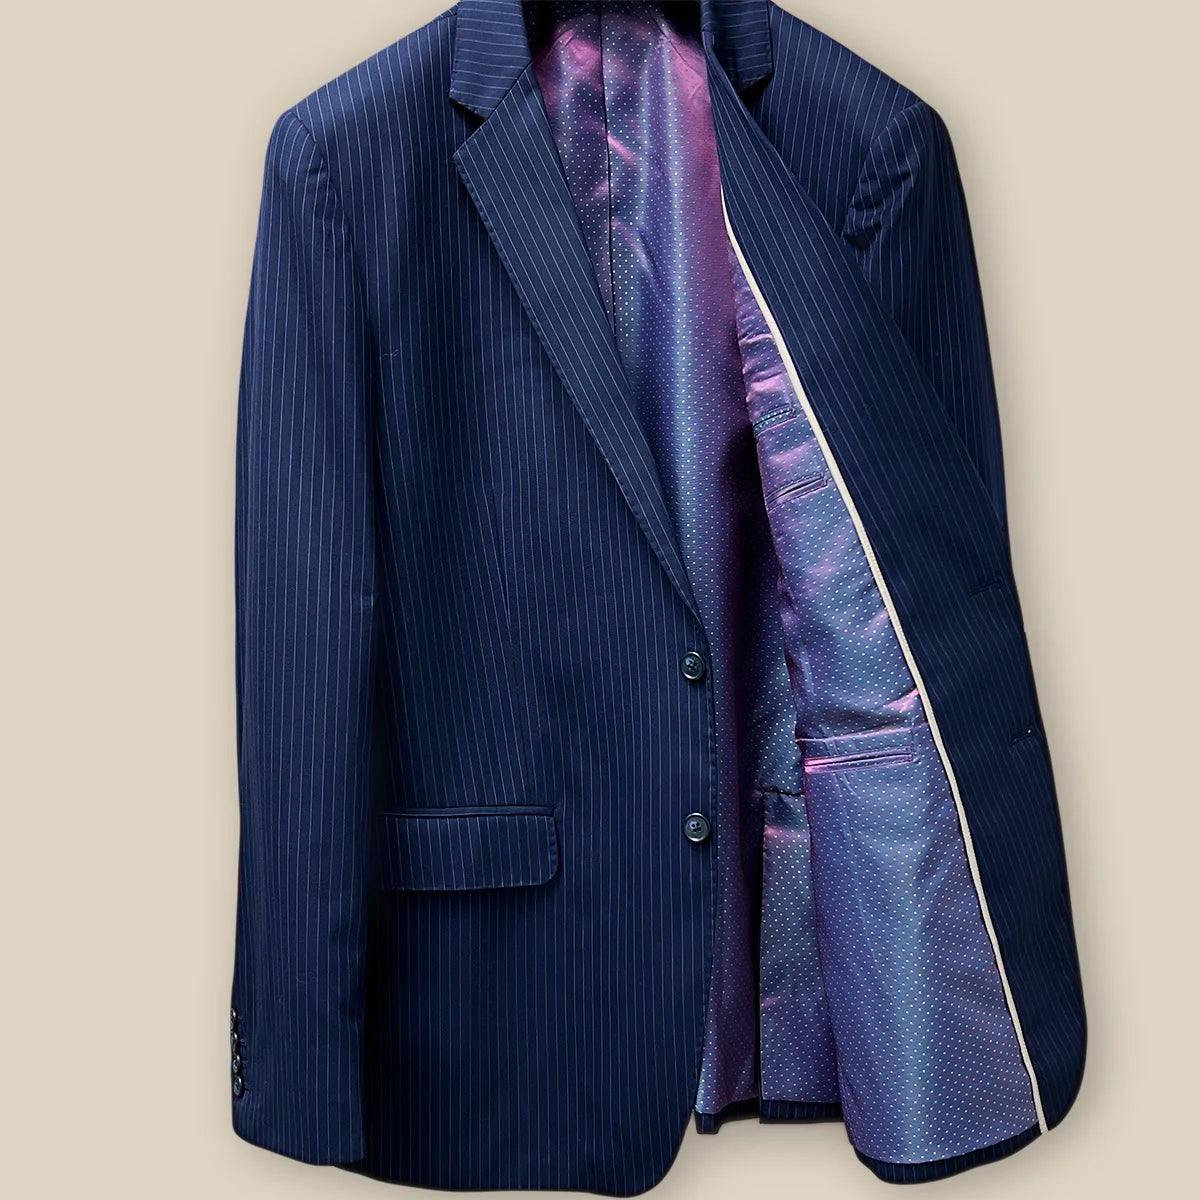 Inside left view of a navy suit with purple pinstripes, showing the internal details and craftsmanship.